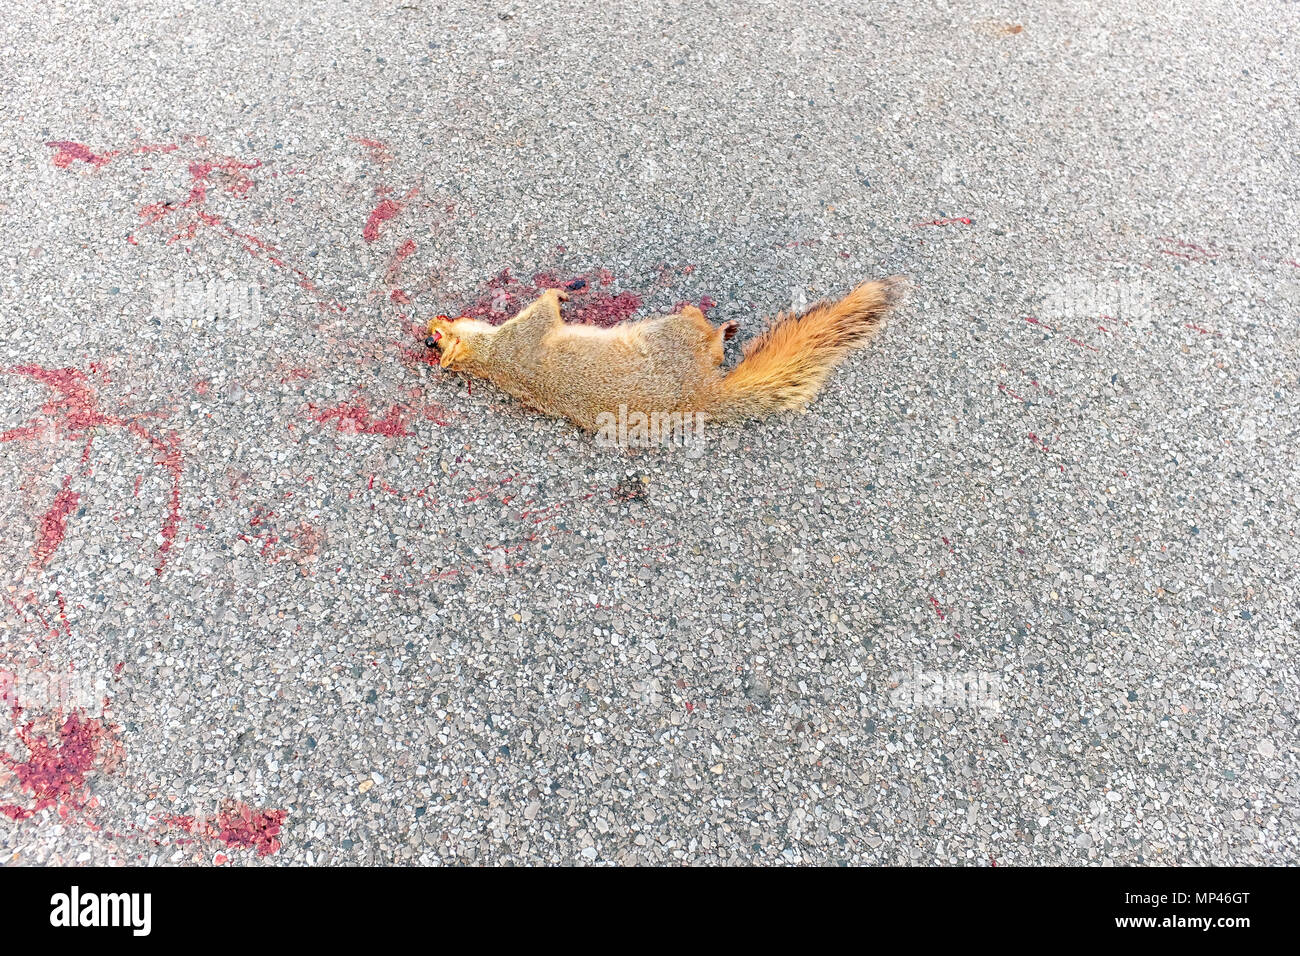 Sciurus carolinensis, the eastern gray squirrel, dead on an asphalt road recently hit and killed by a vehicle. Stock Photo